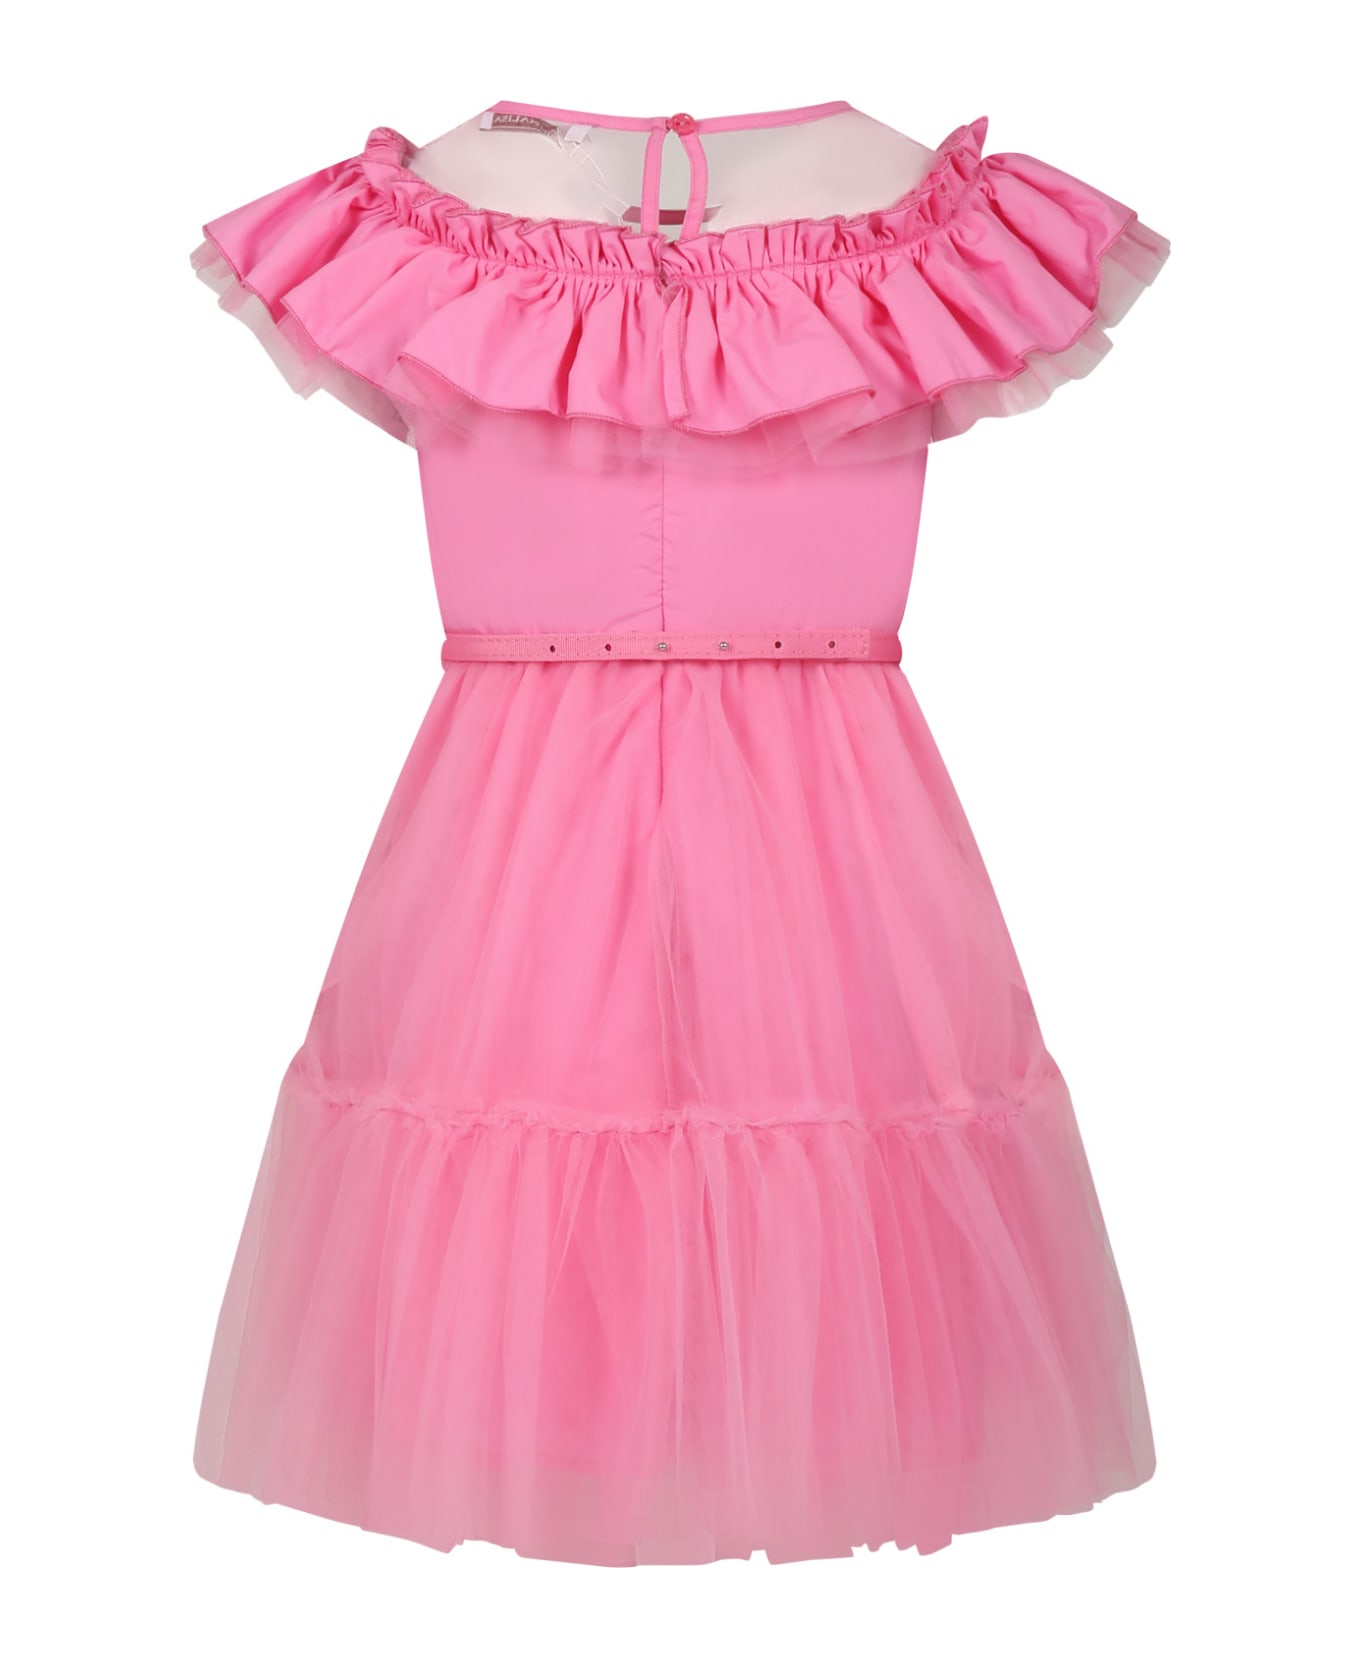 Monnalisa Pink Dress For Girl With Tulle And Ruffles - Pink